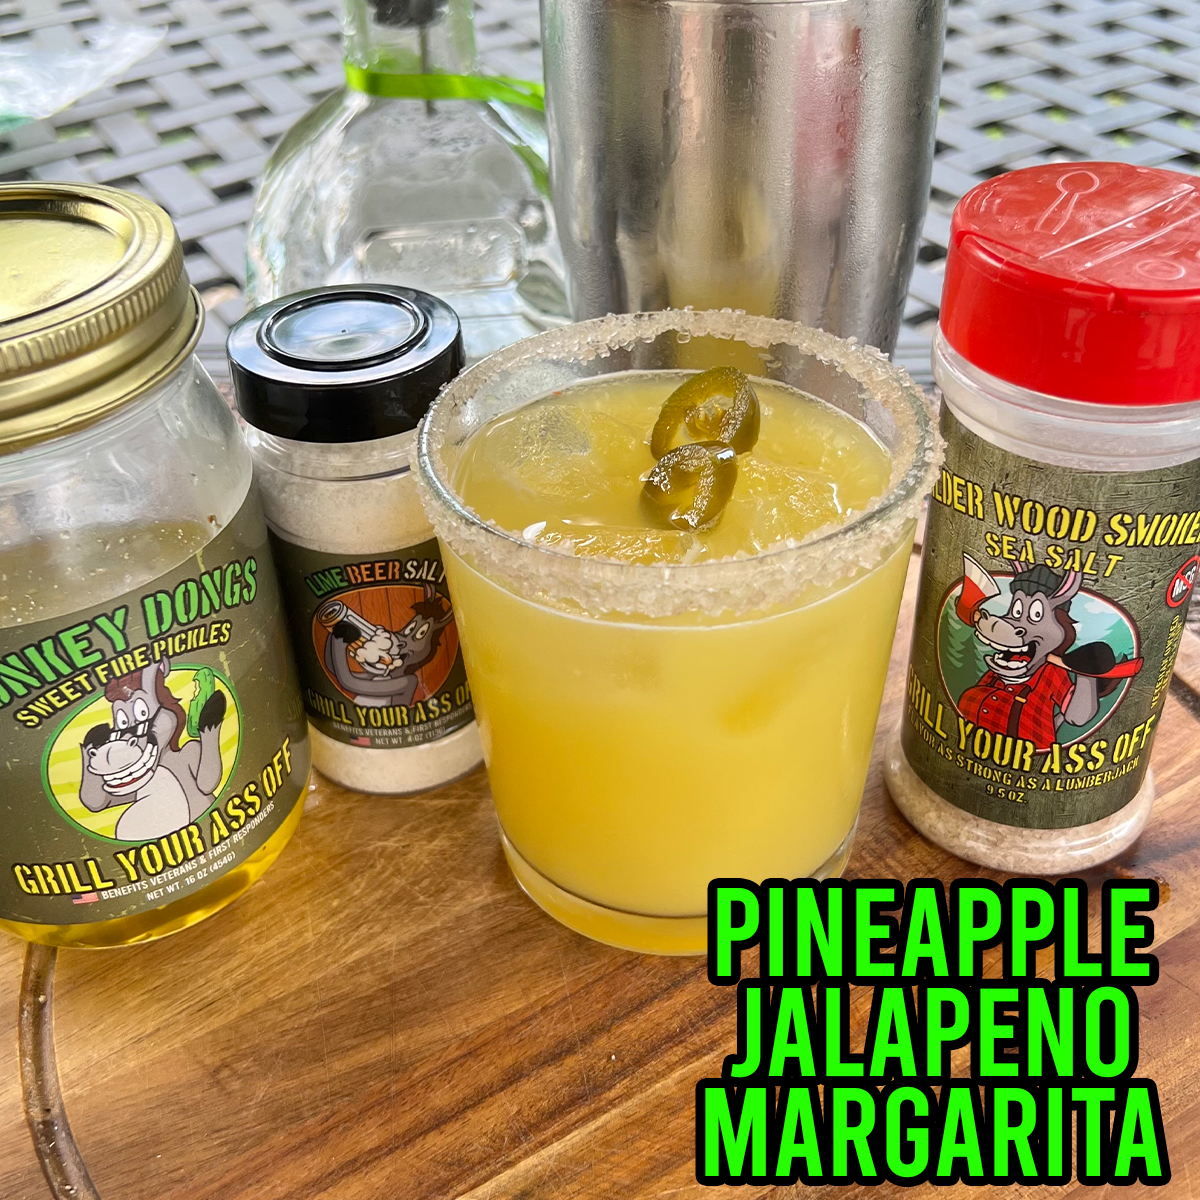 Pineapple Jalapeno Margarita topped with Donkey Dongs and with Lime beer salt and Alder Wood Smoked Sea Salt